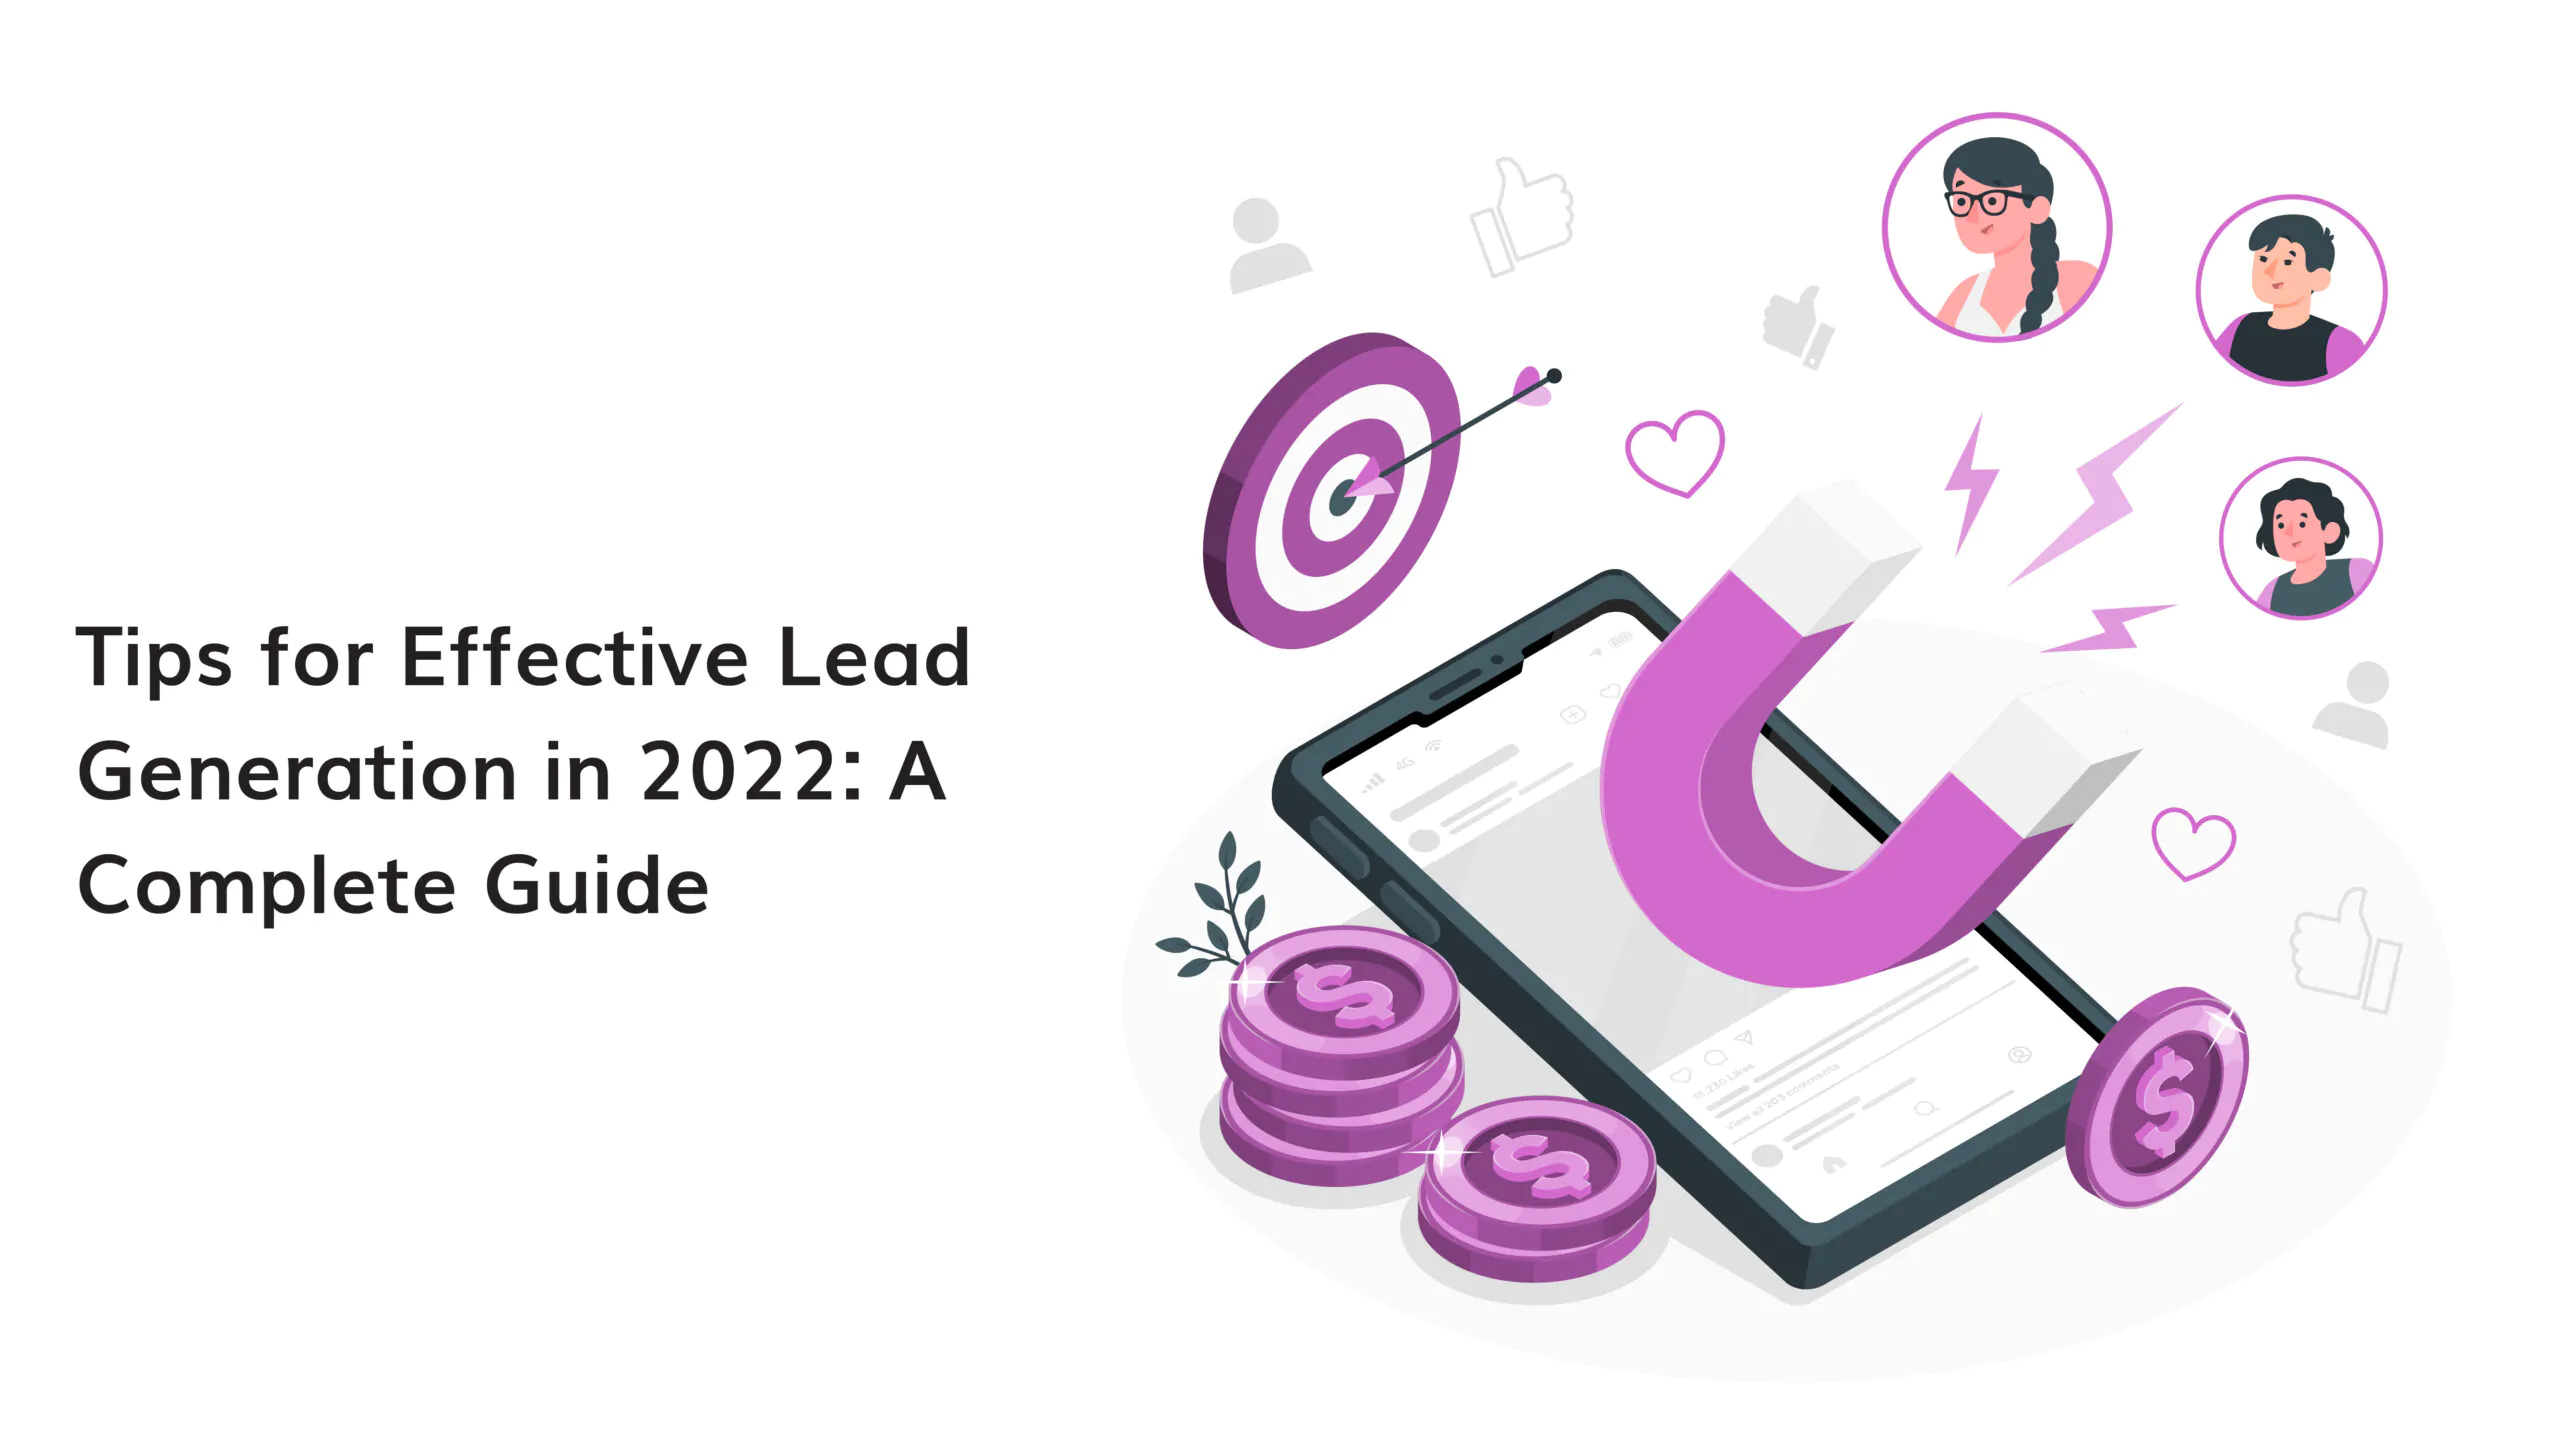 Tips for Effective Lead Generation